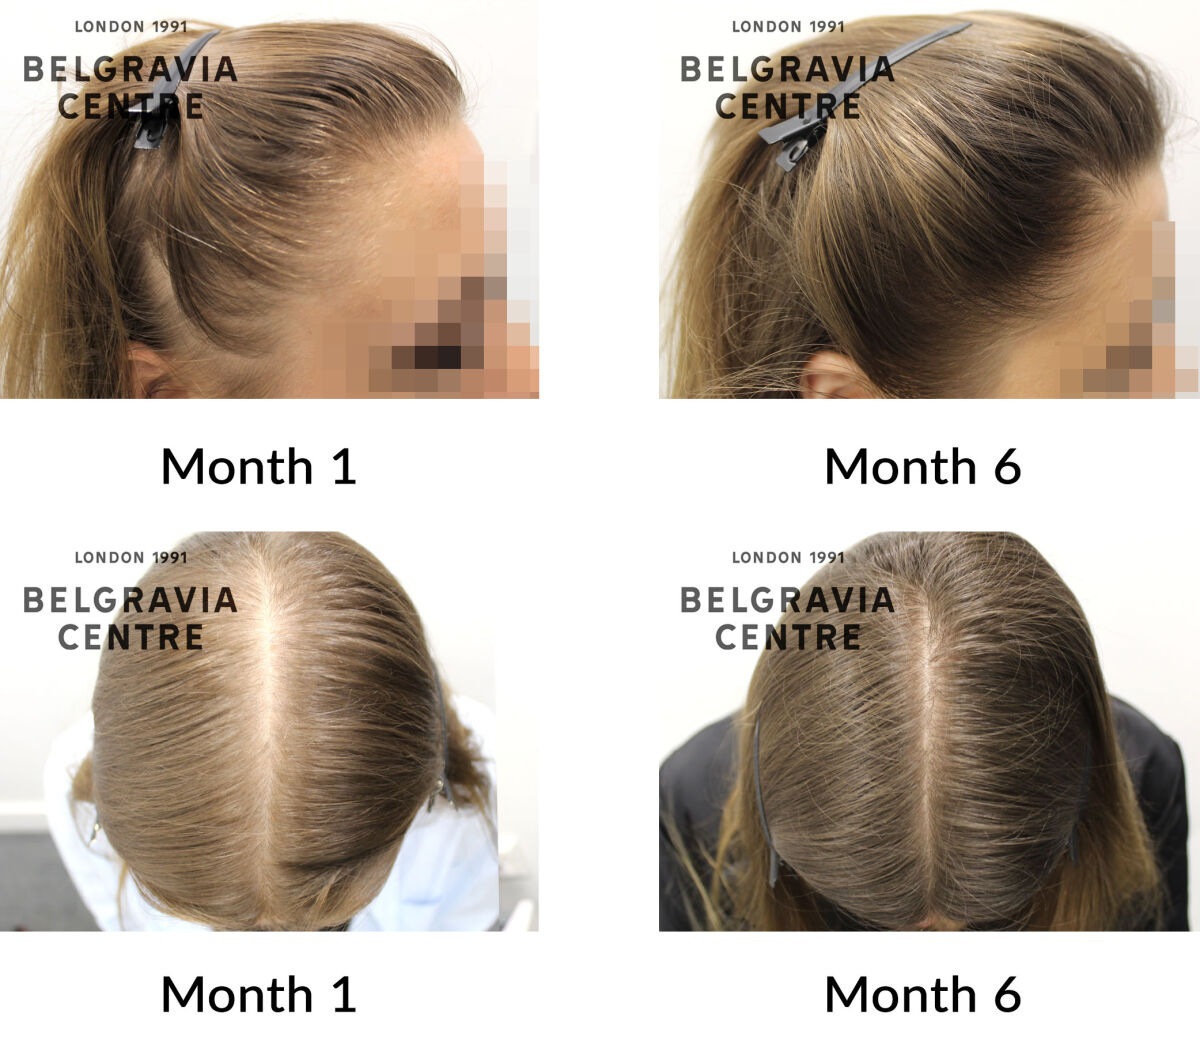 female pattern hair loss and diffuse hair loss the belgravia centre 444246